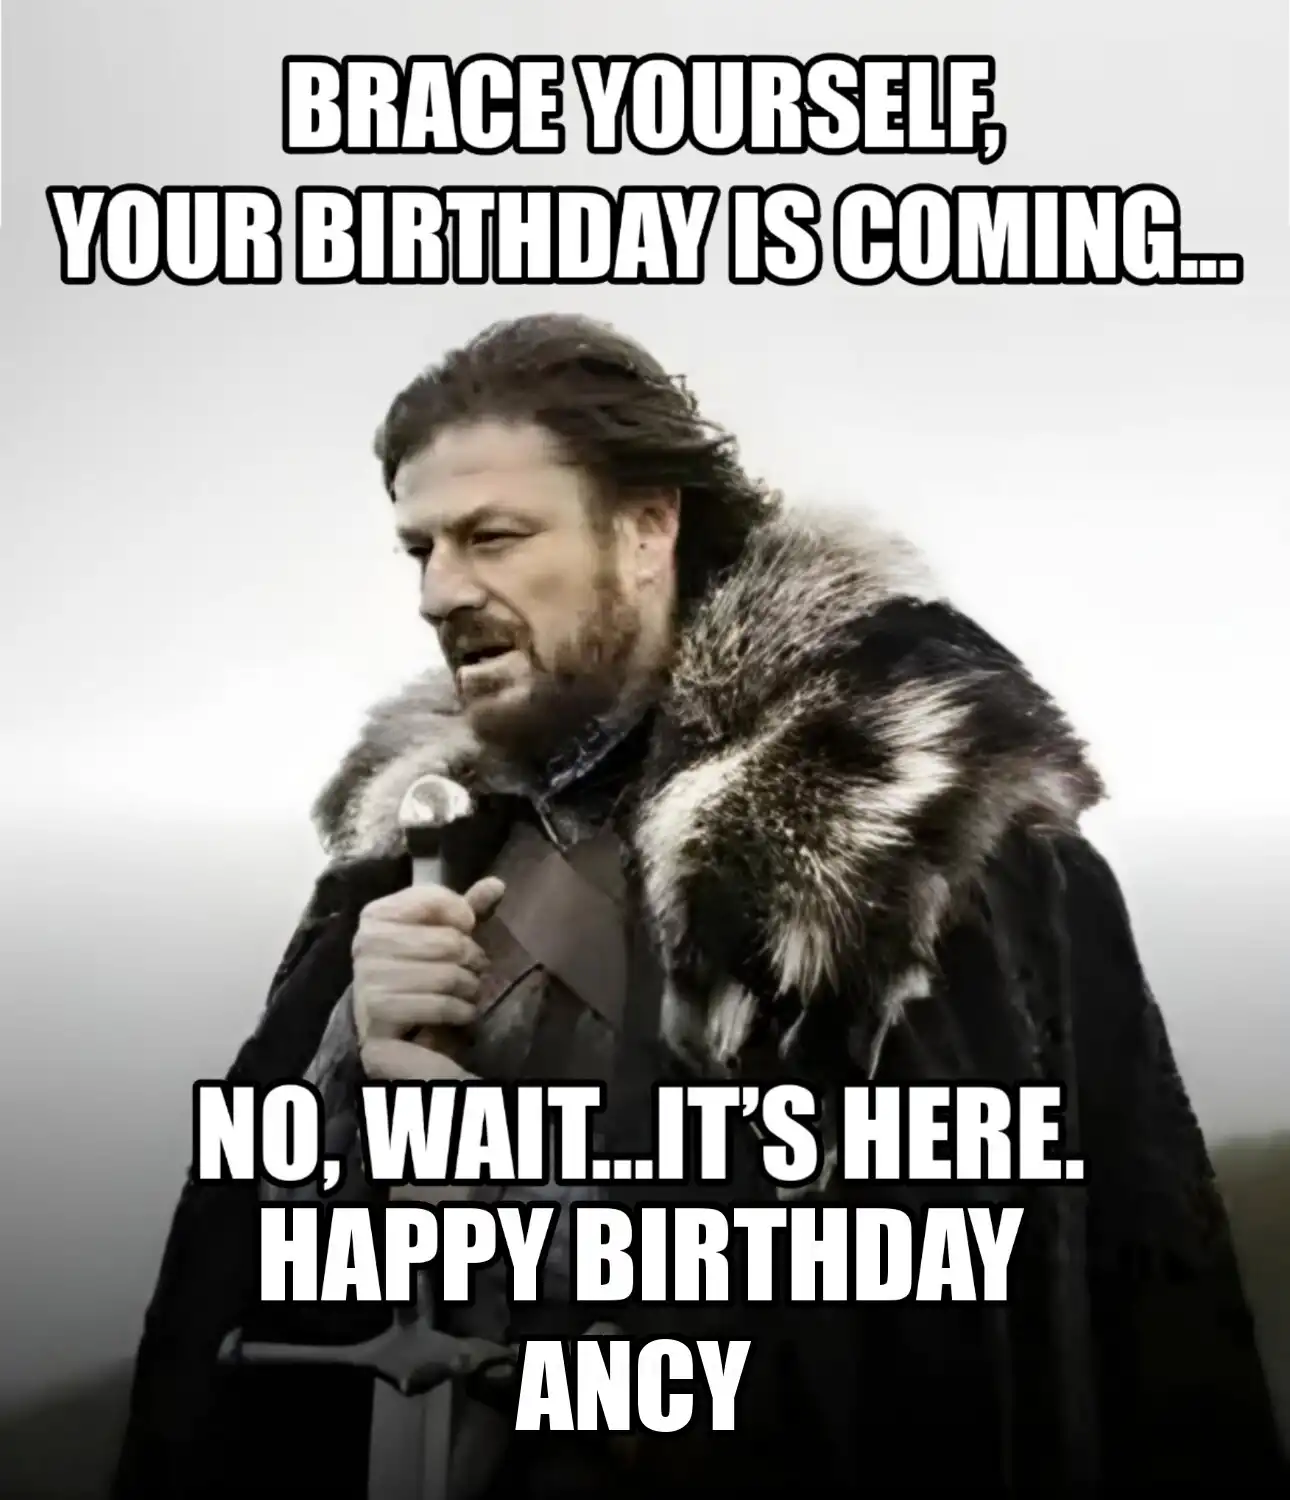 Happy Birthday Ancy Brace Yourself Your Birthday Is Coming Meme